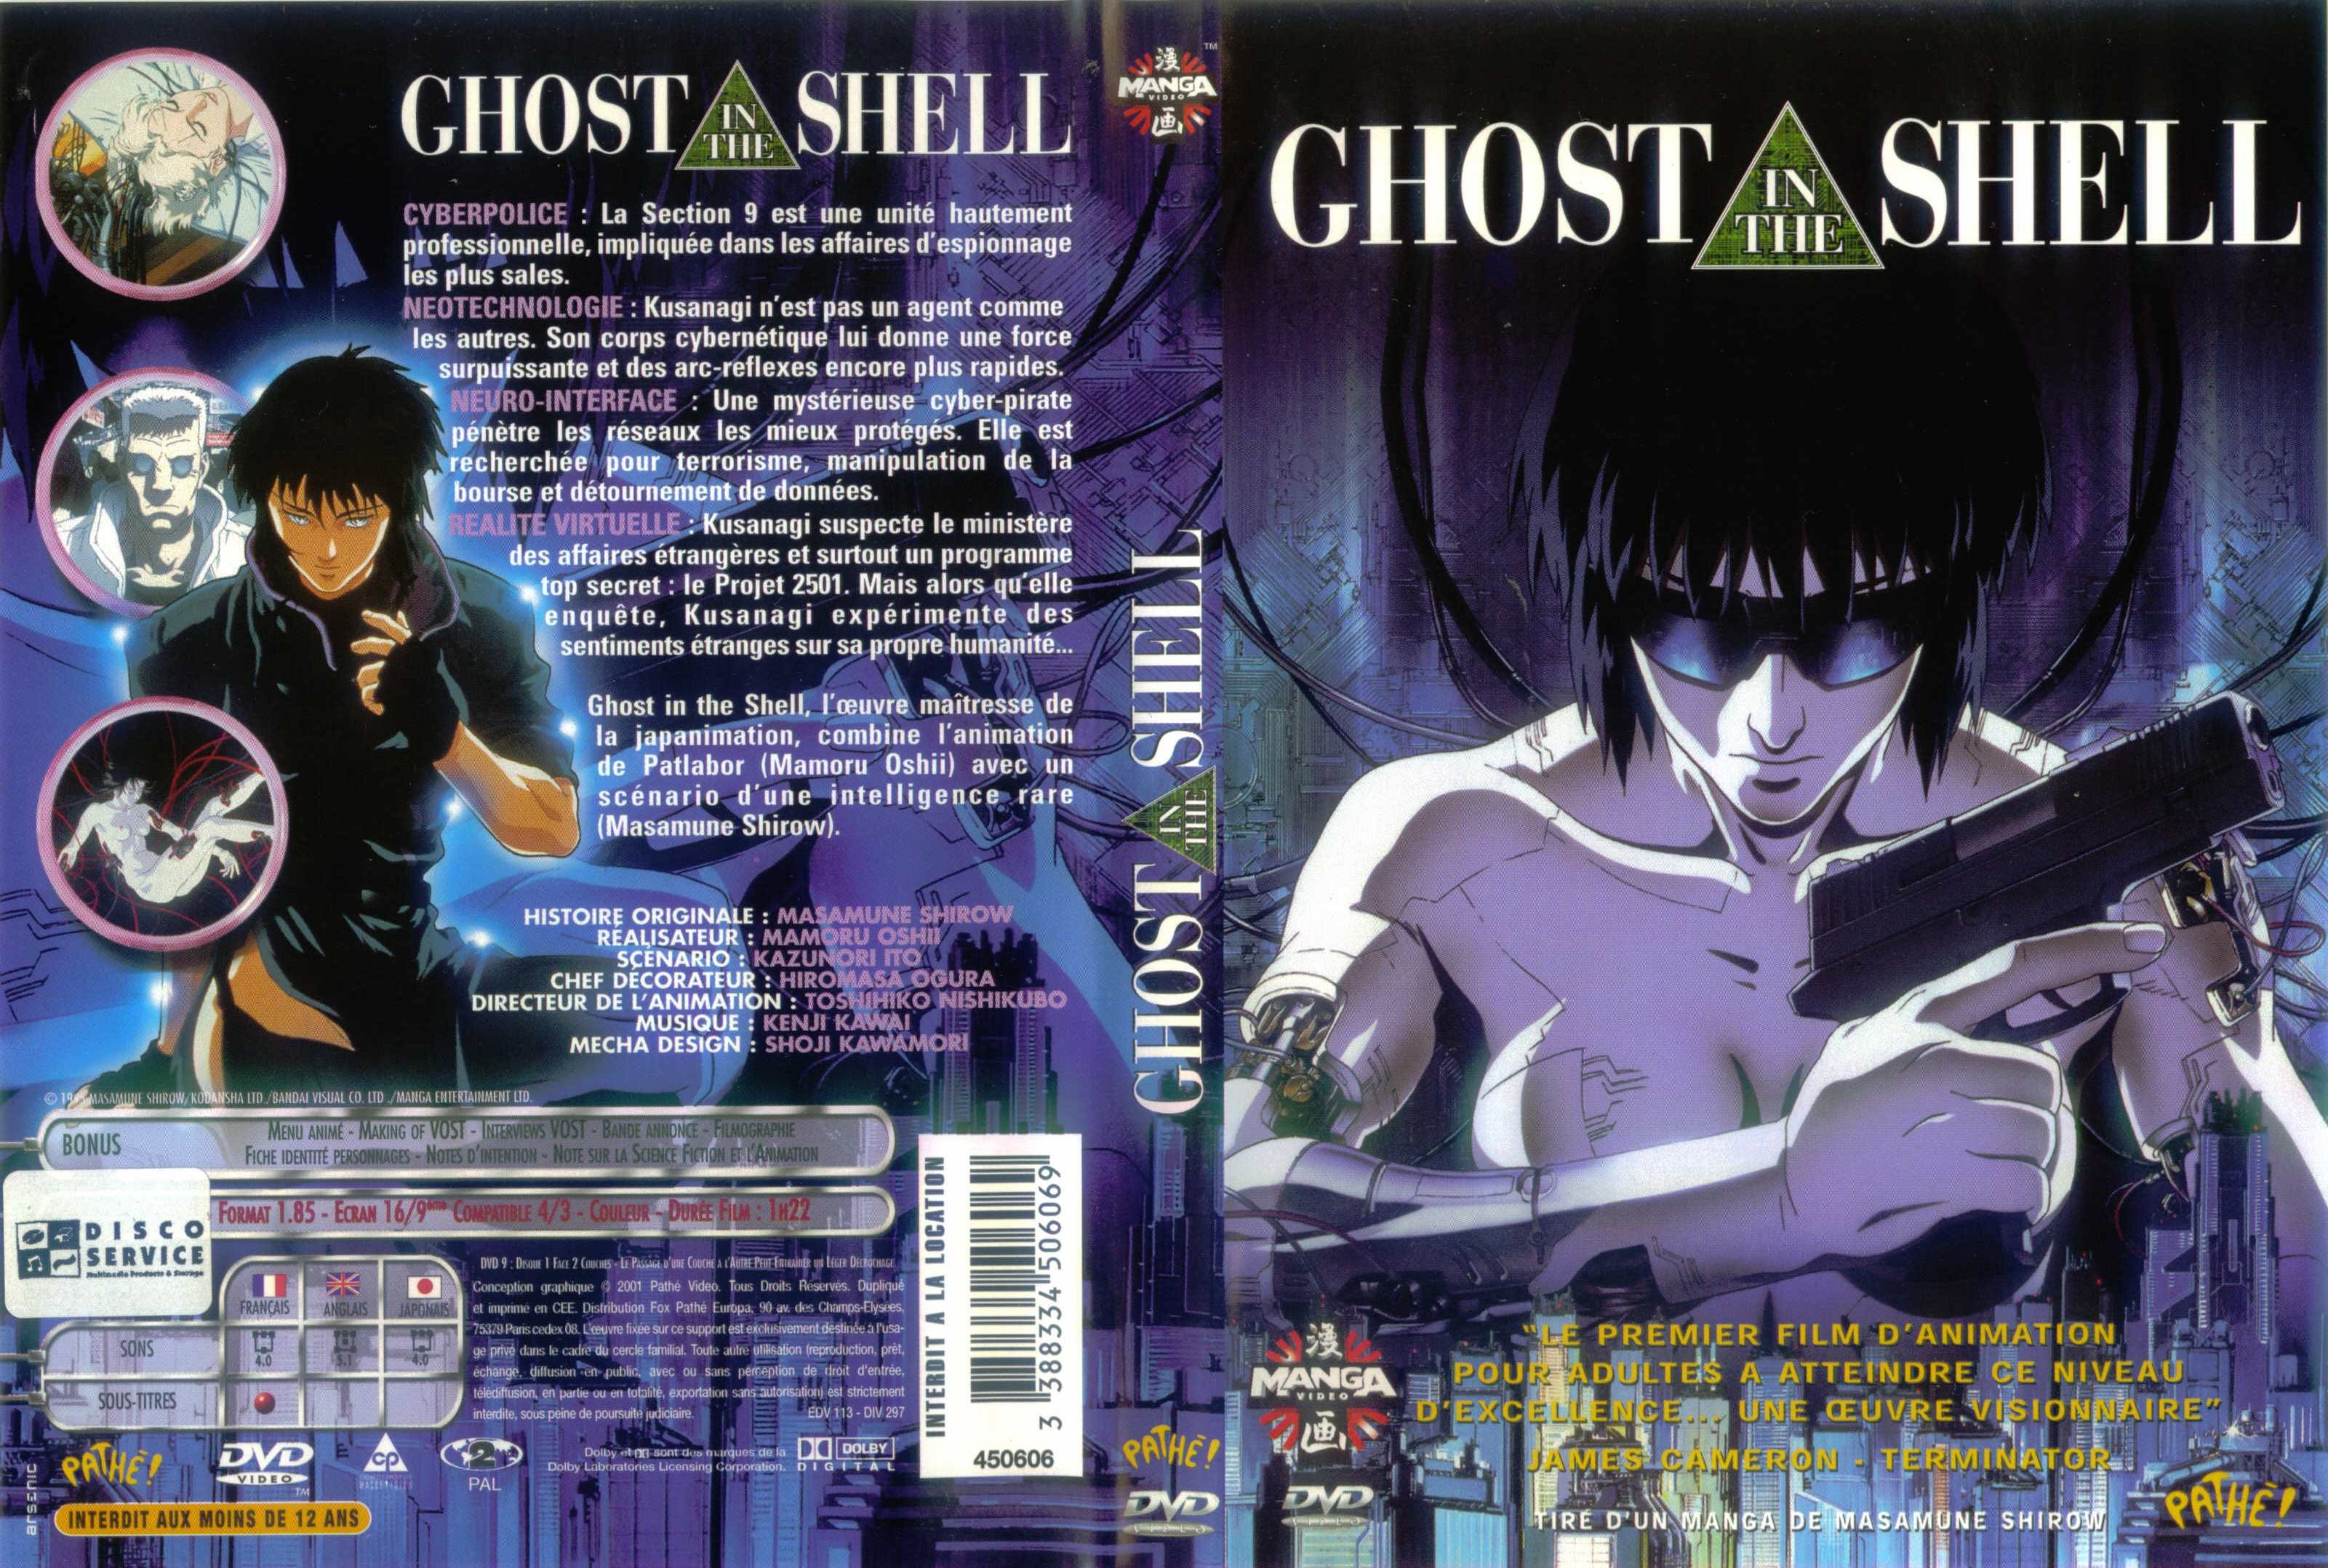 Jaquette DVD Ghost in the shell